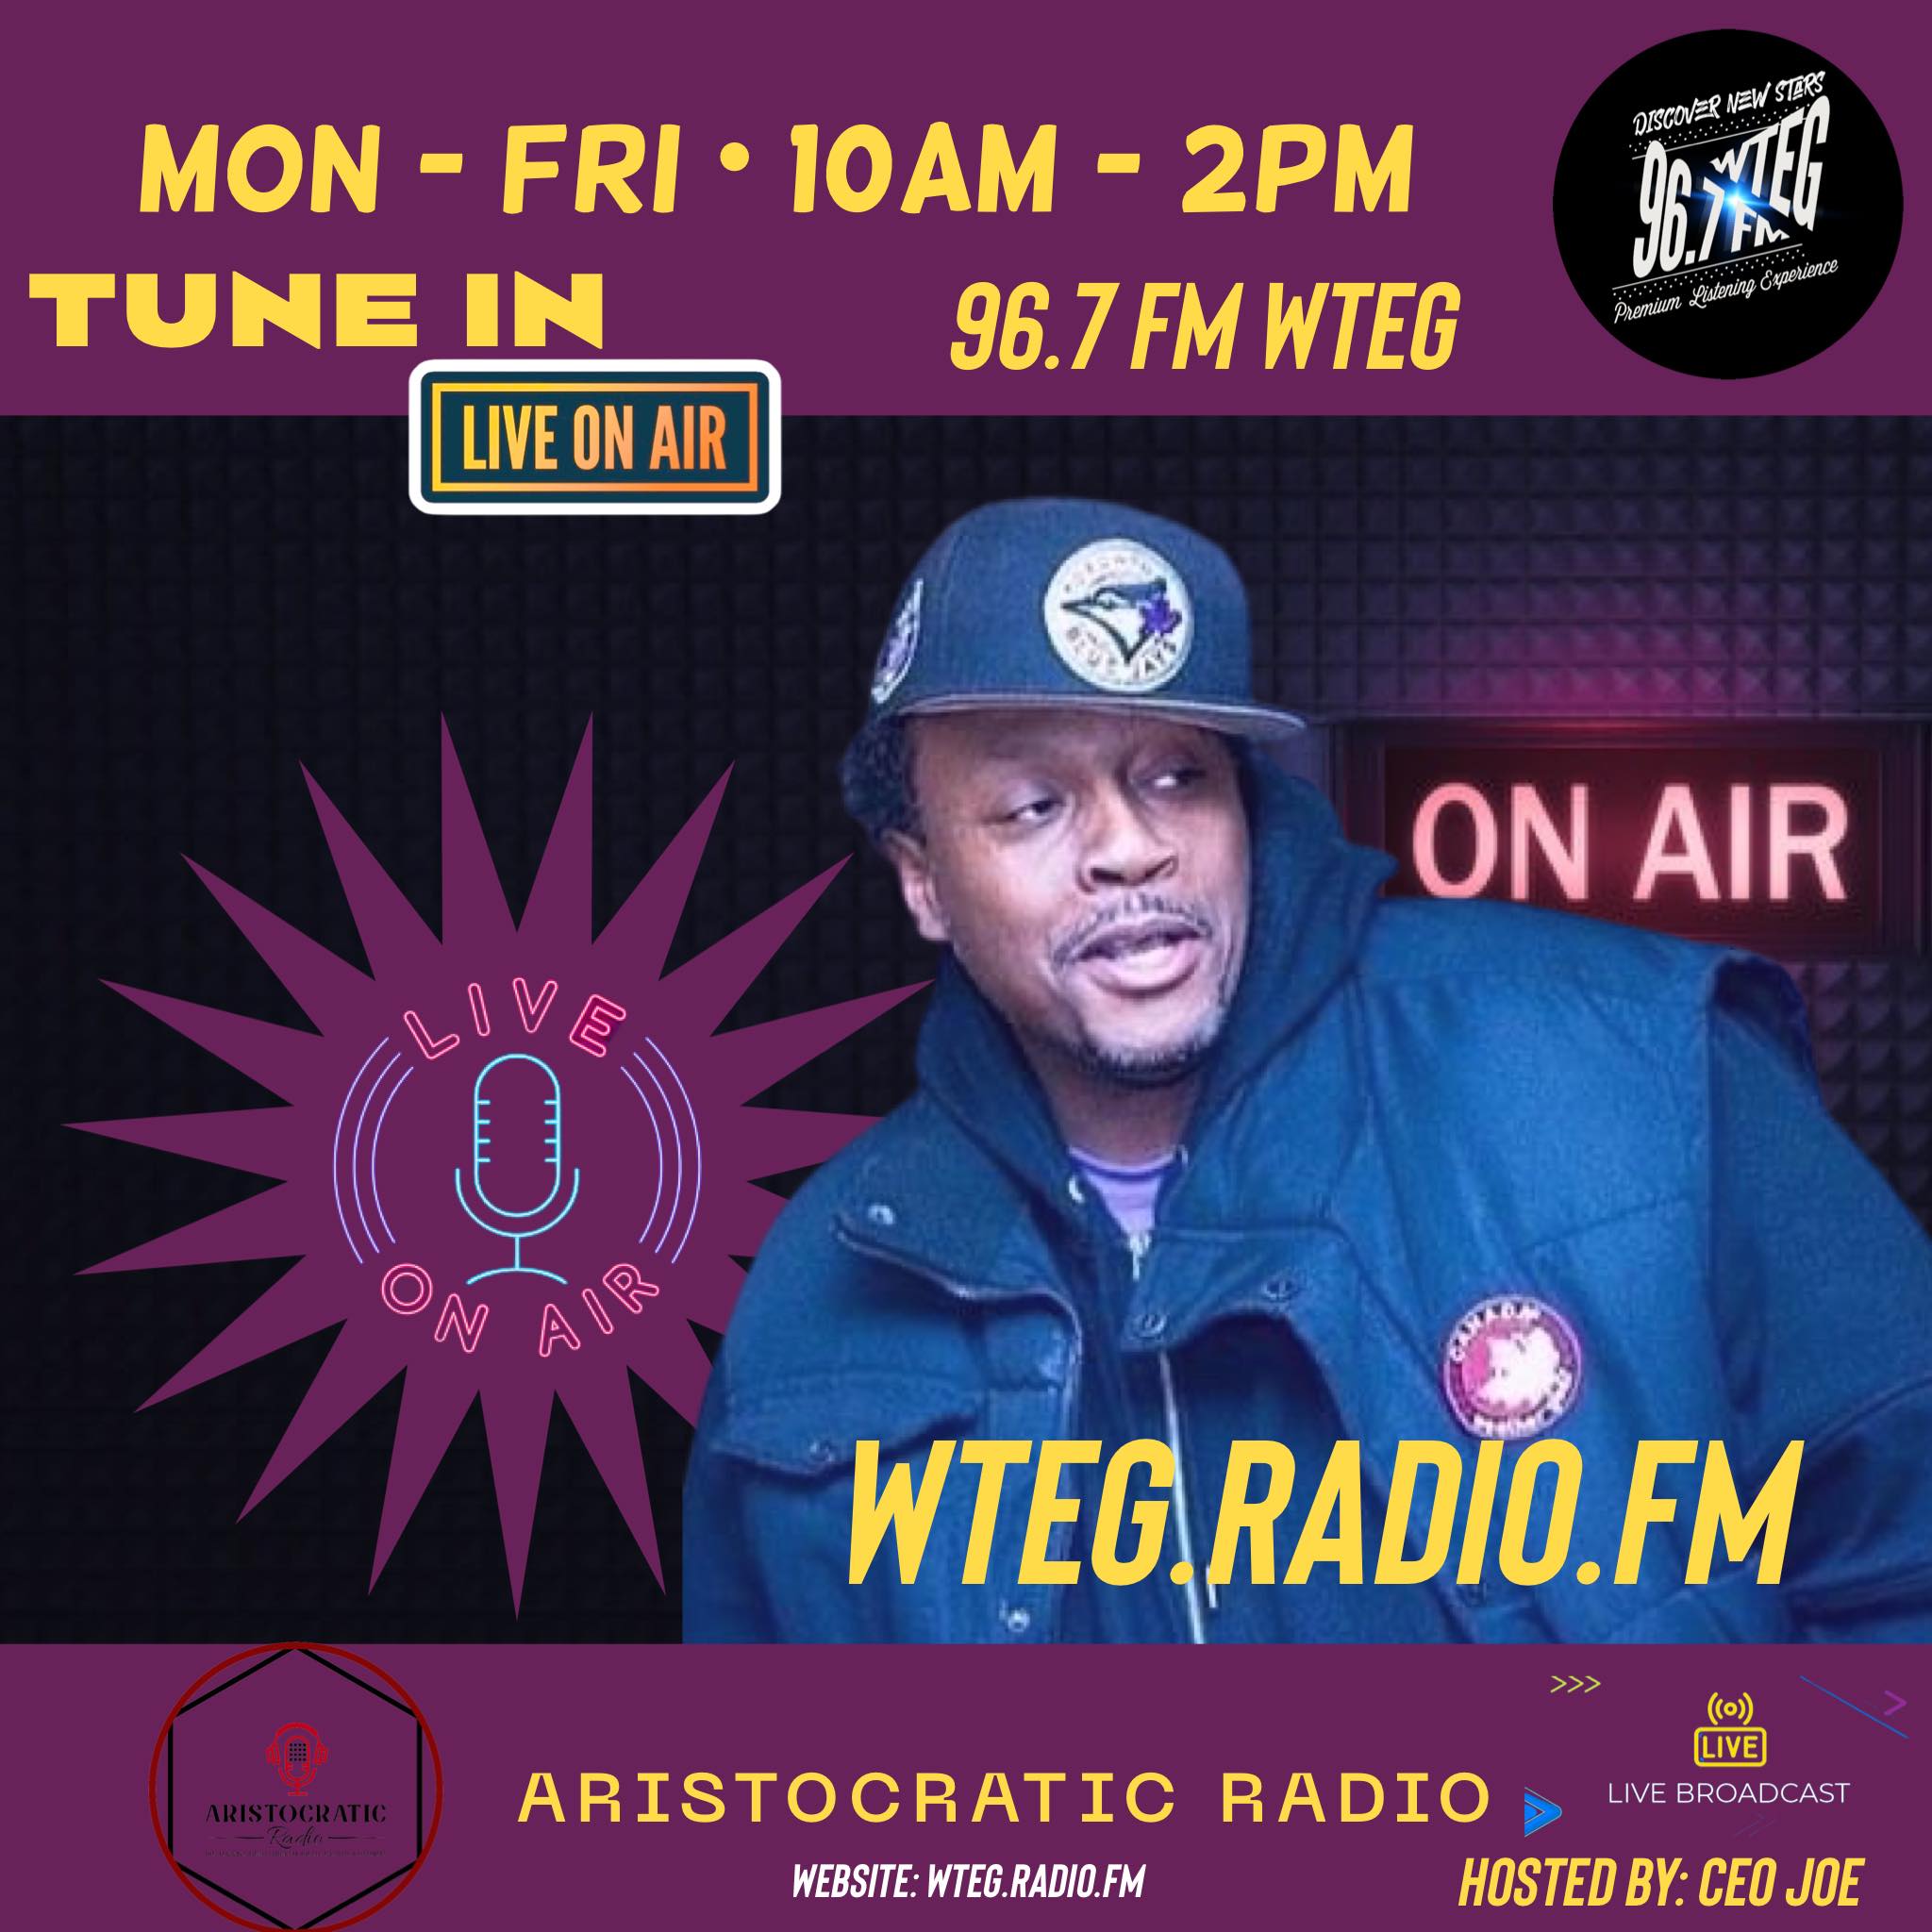 Art for Aristocratic Radio  by Hosted By:  CEO JOE